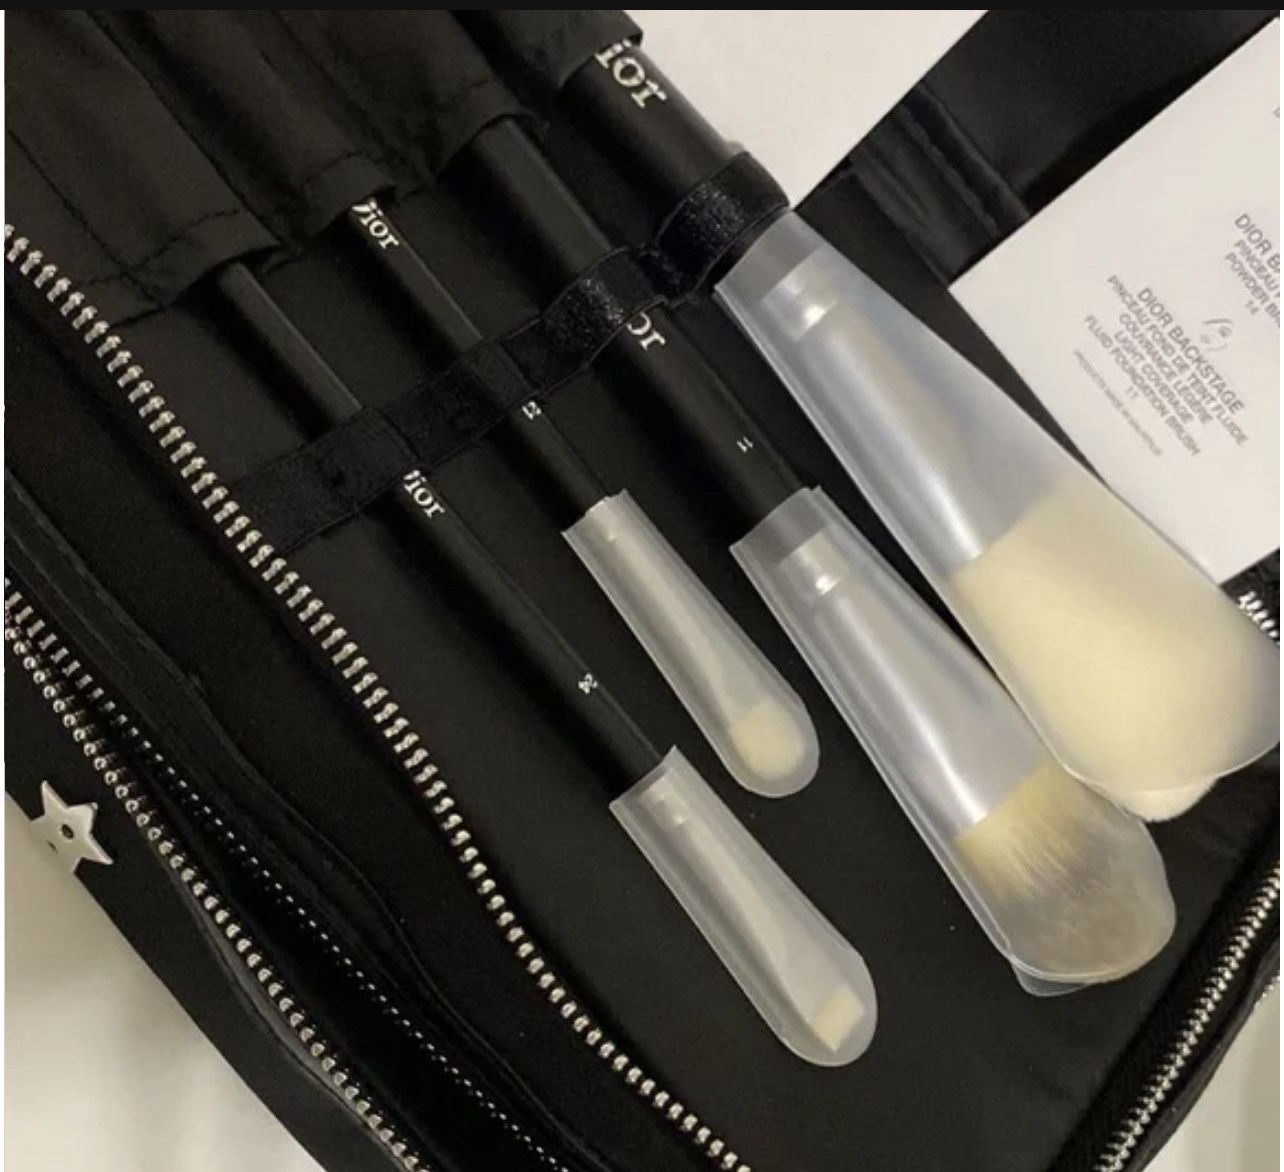 Dior Makeup Brushes Set With pouch